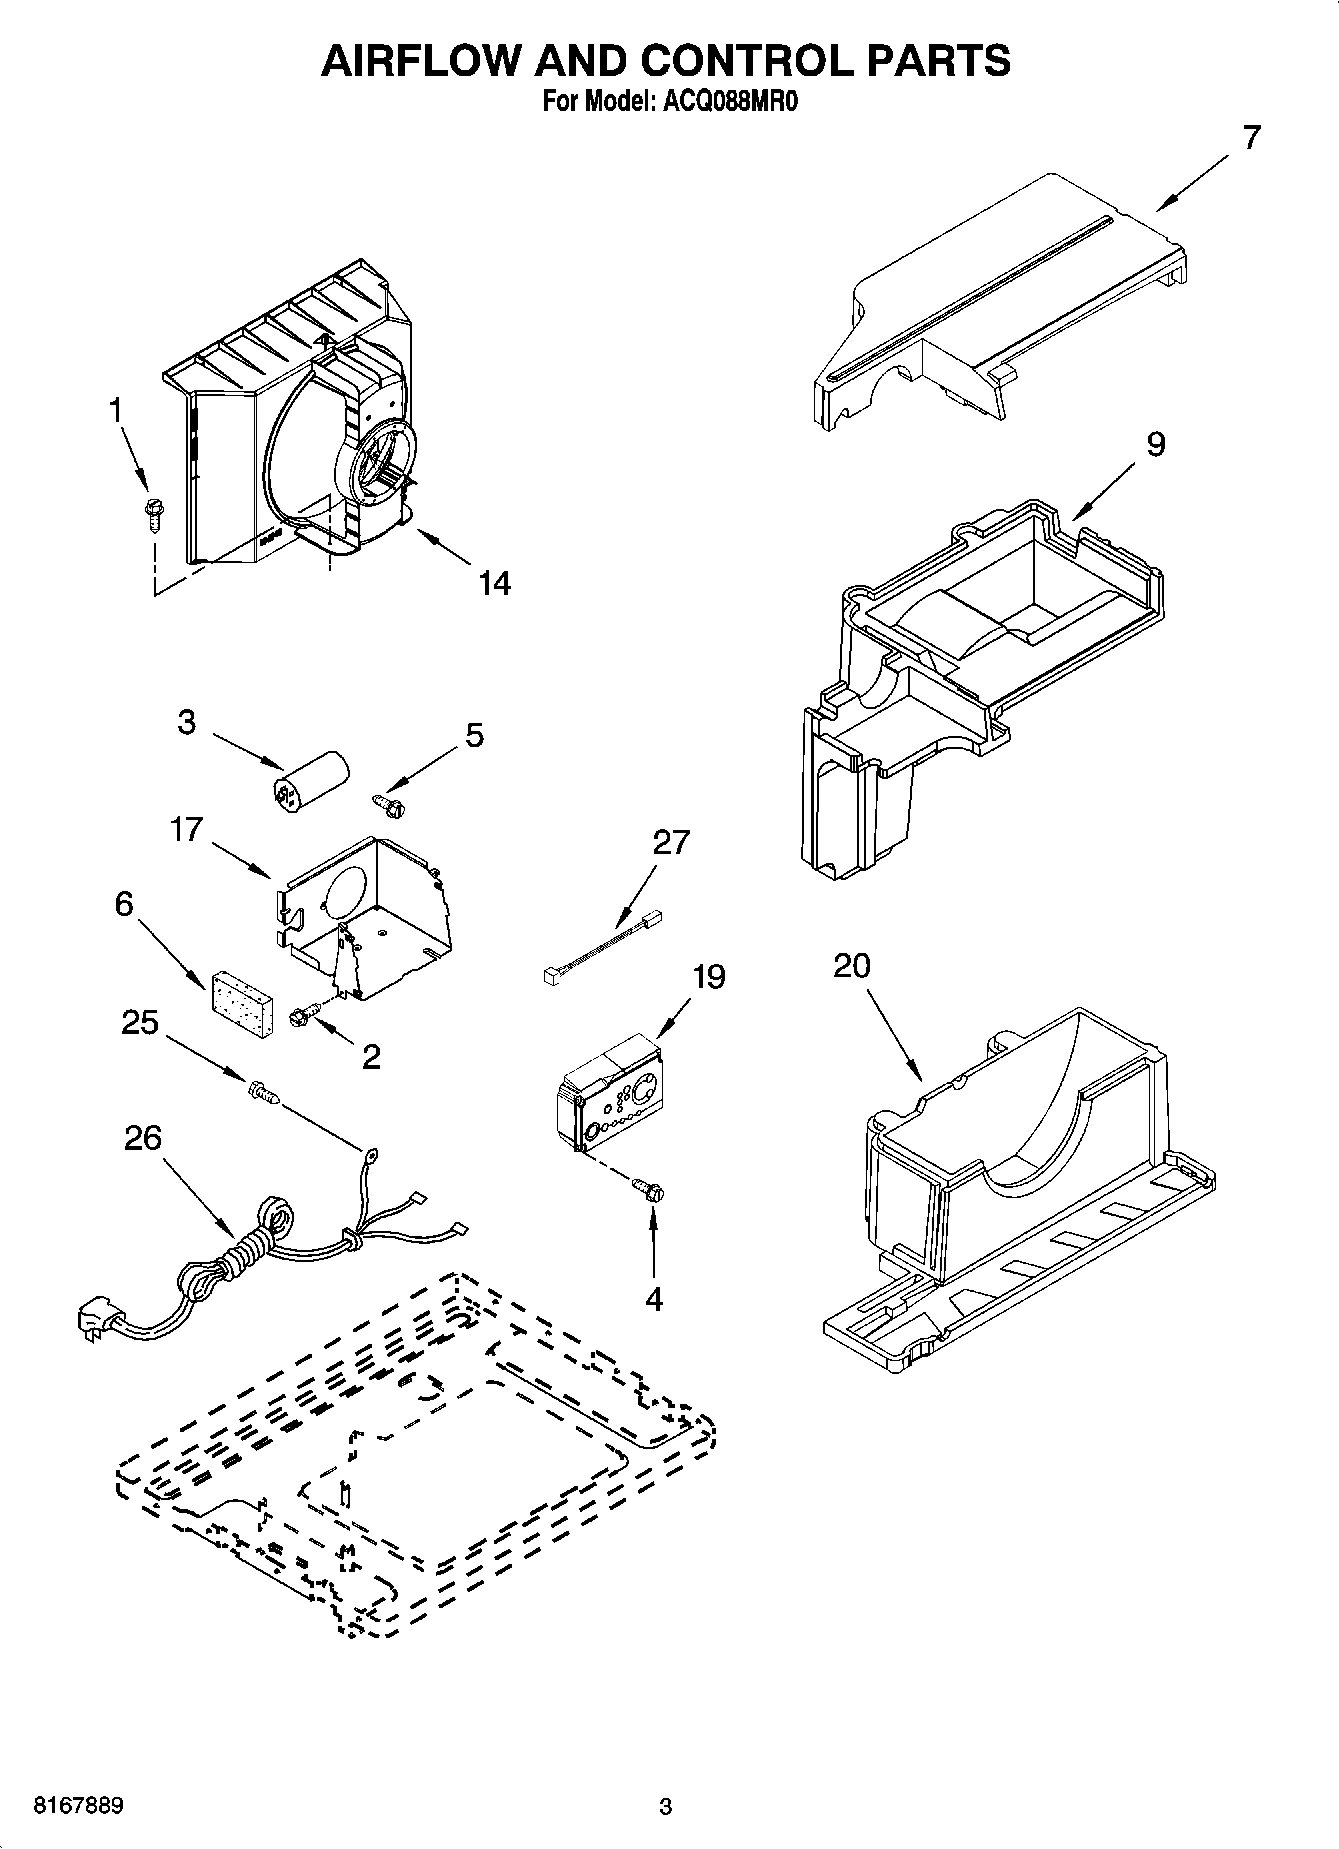 02 - AIR FLOW AND CONTROL PARTS